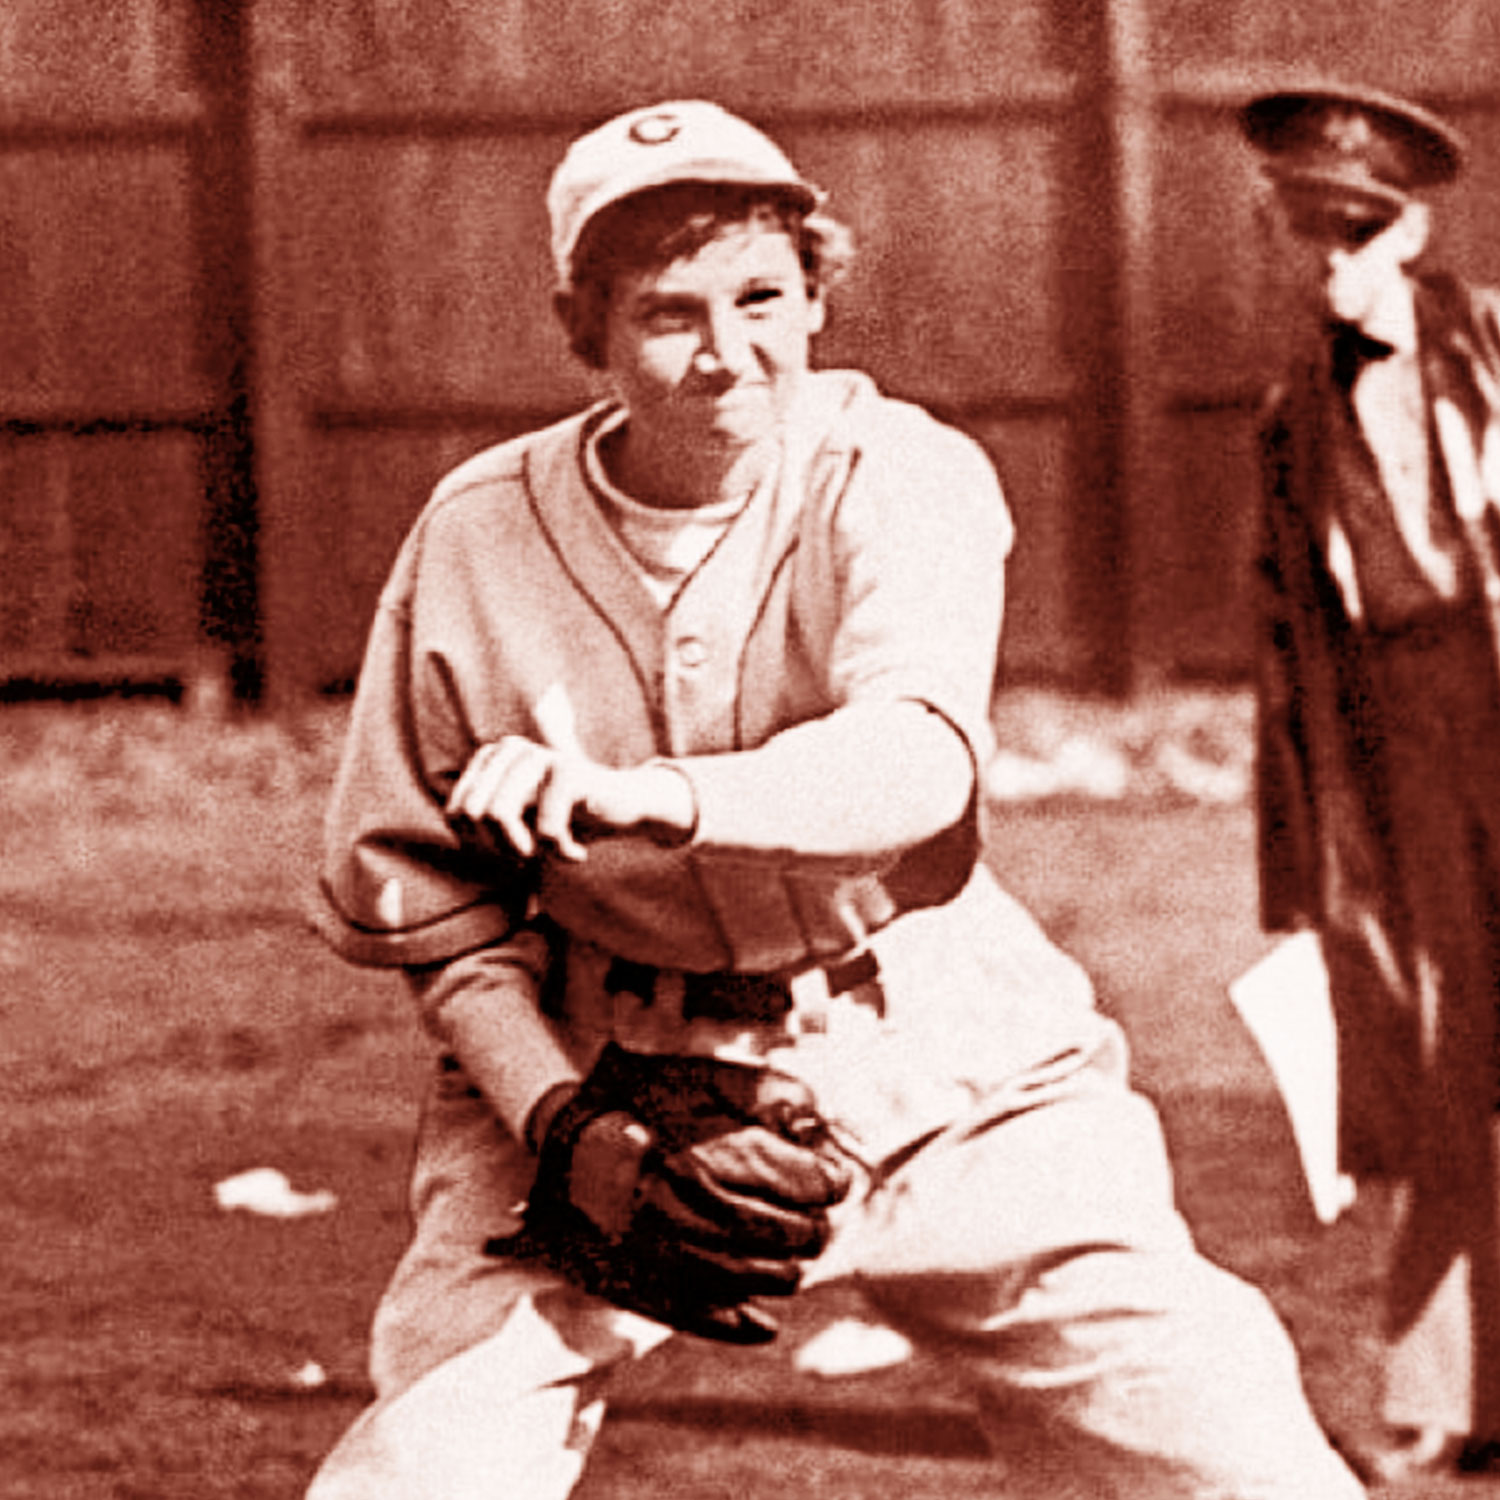 The girl who struck out Babe Ruth